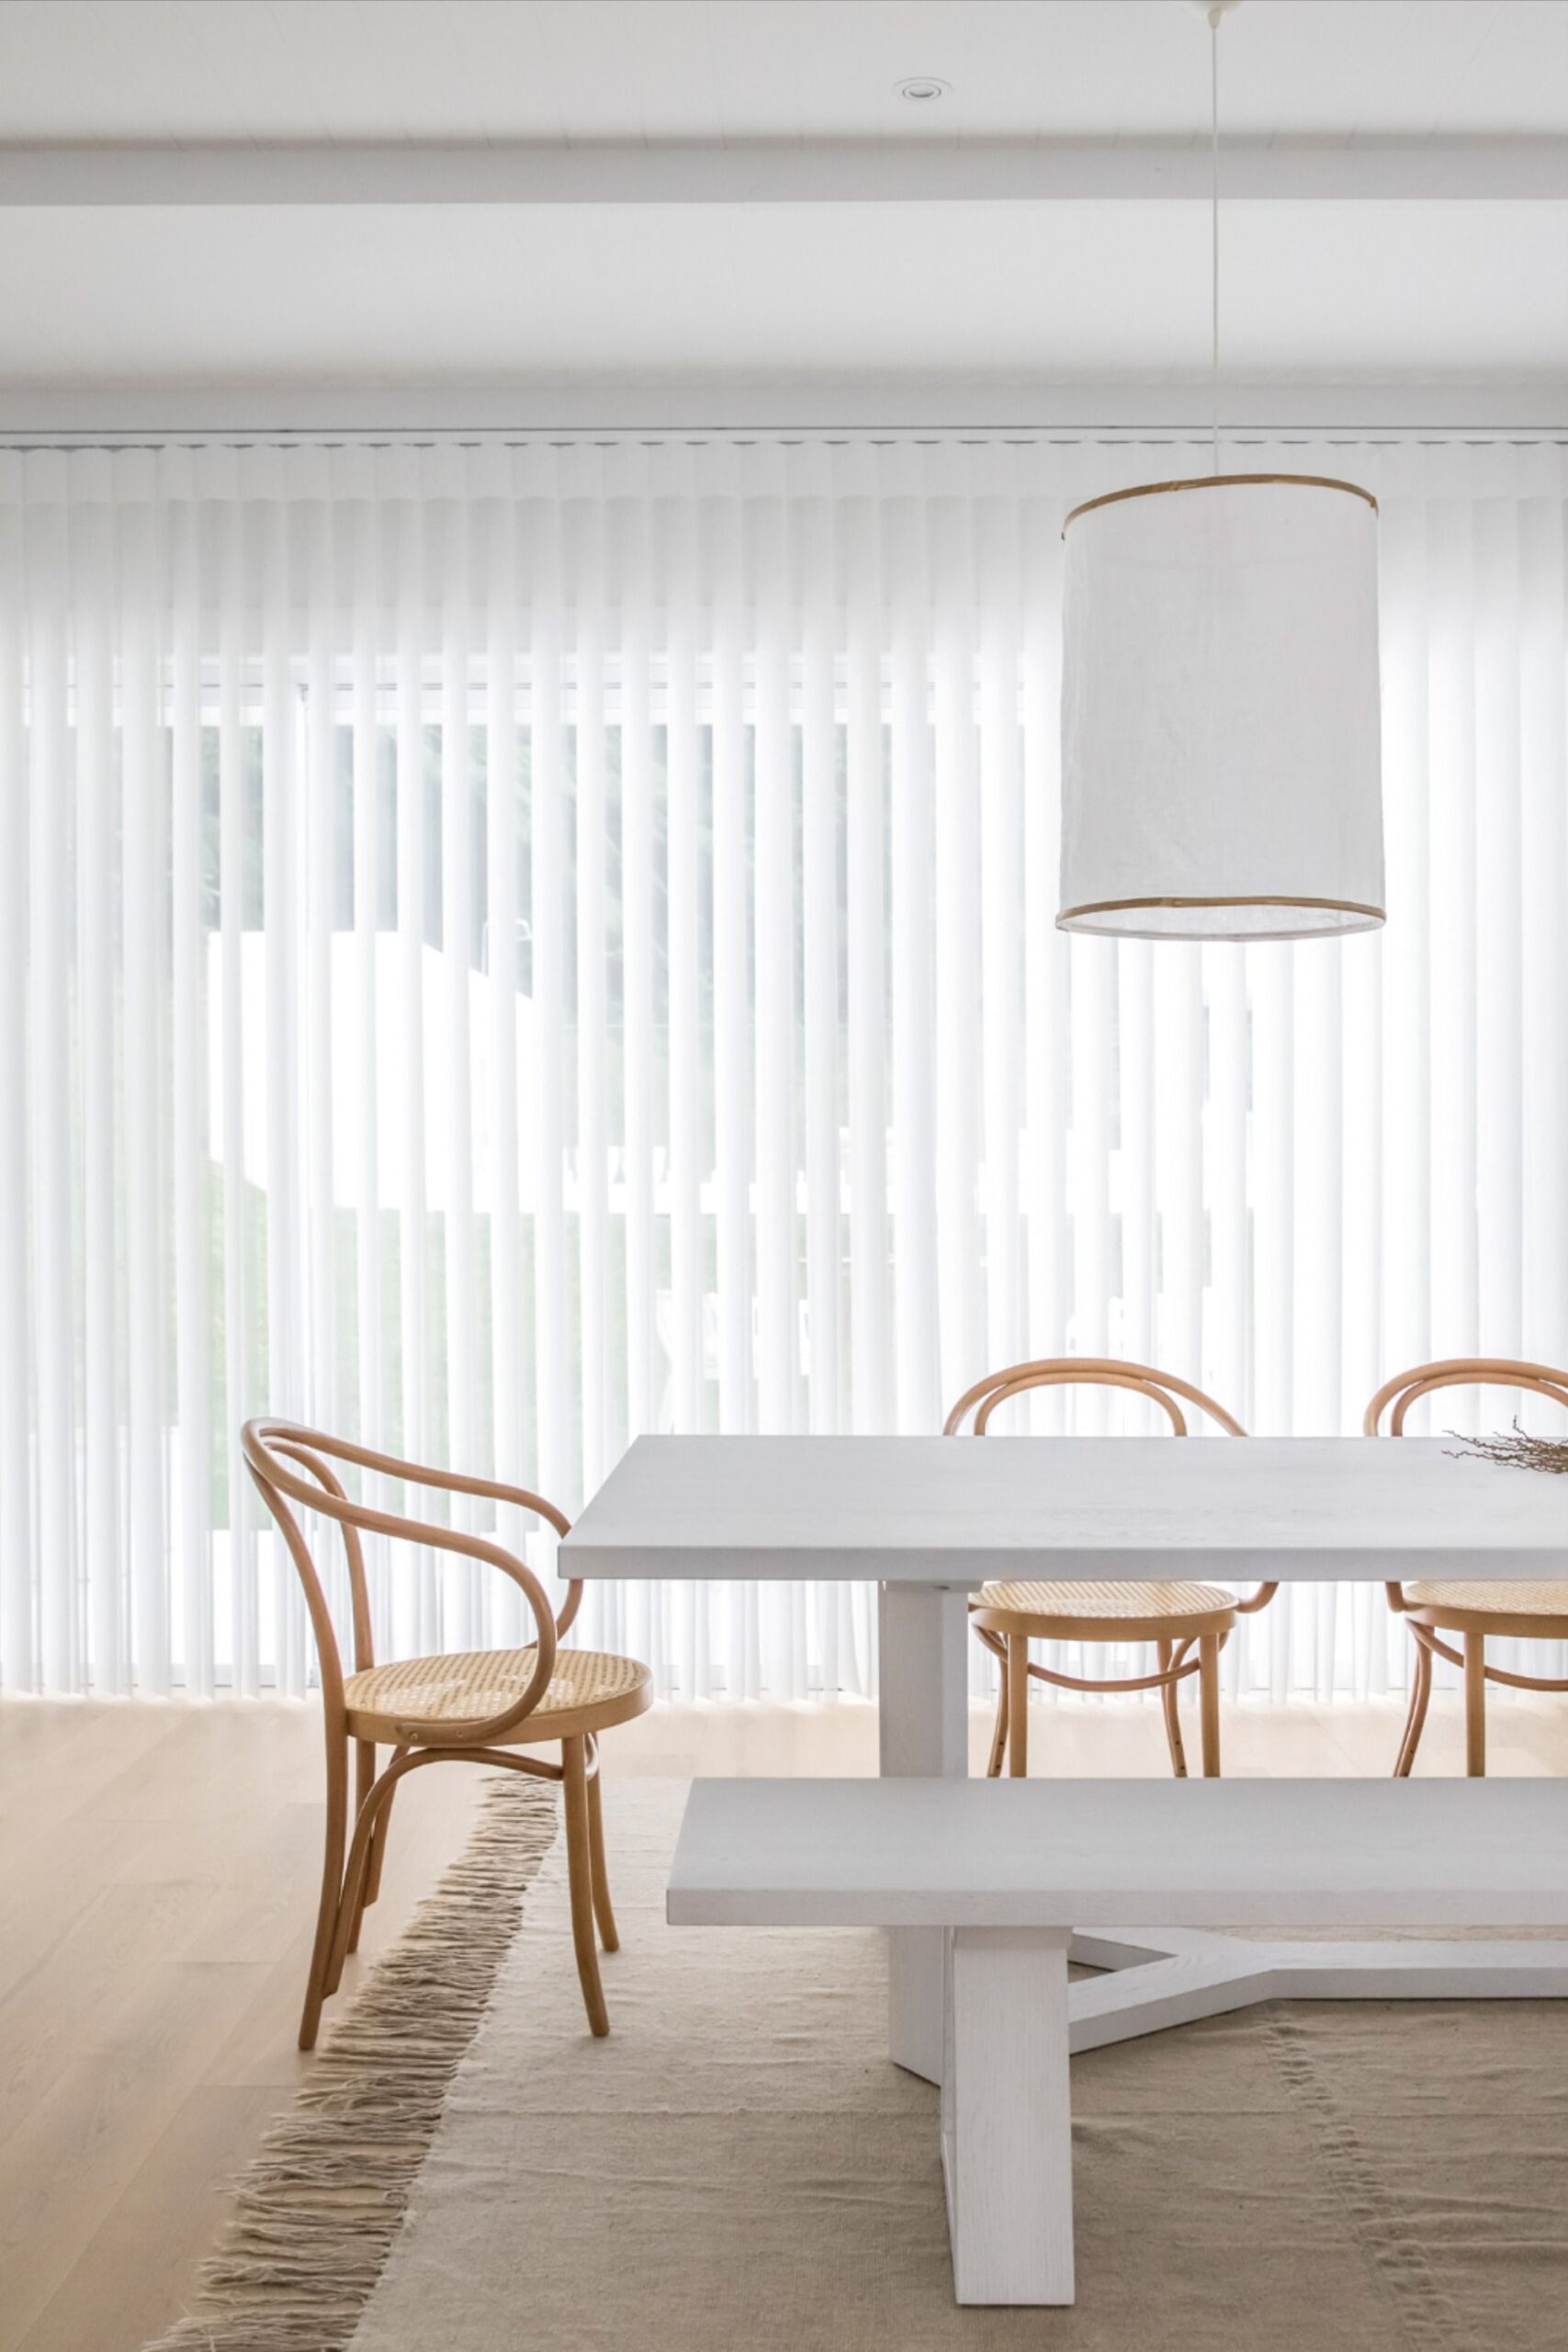 The Benefits of Installing Vertical
Blinds in Your Home